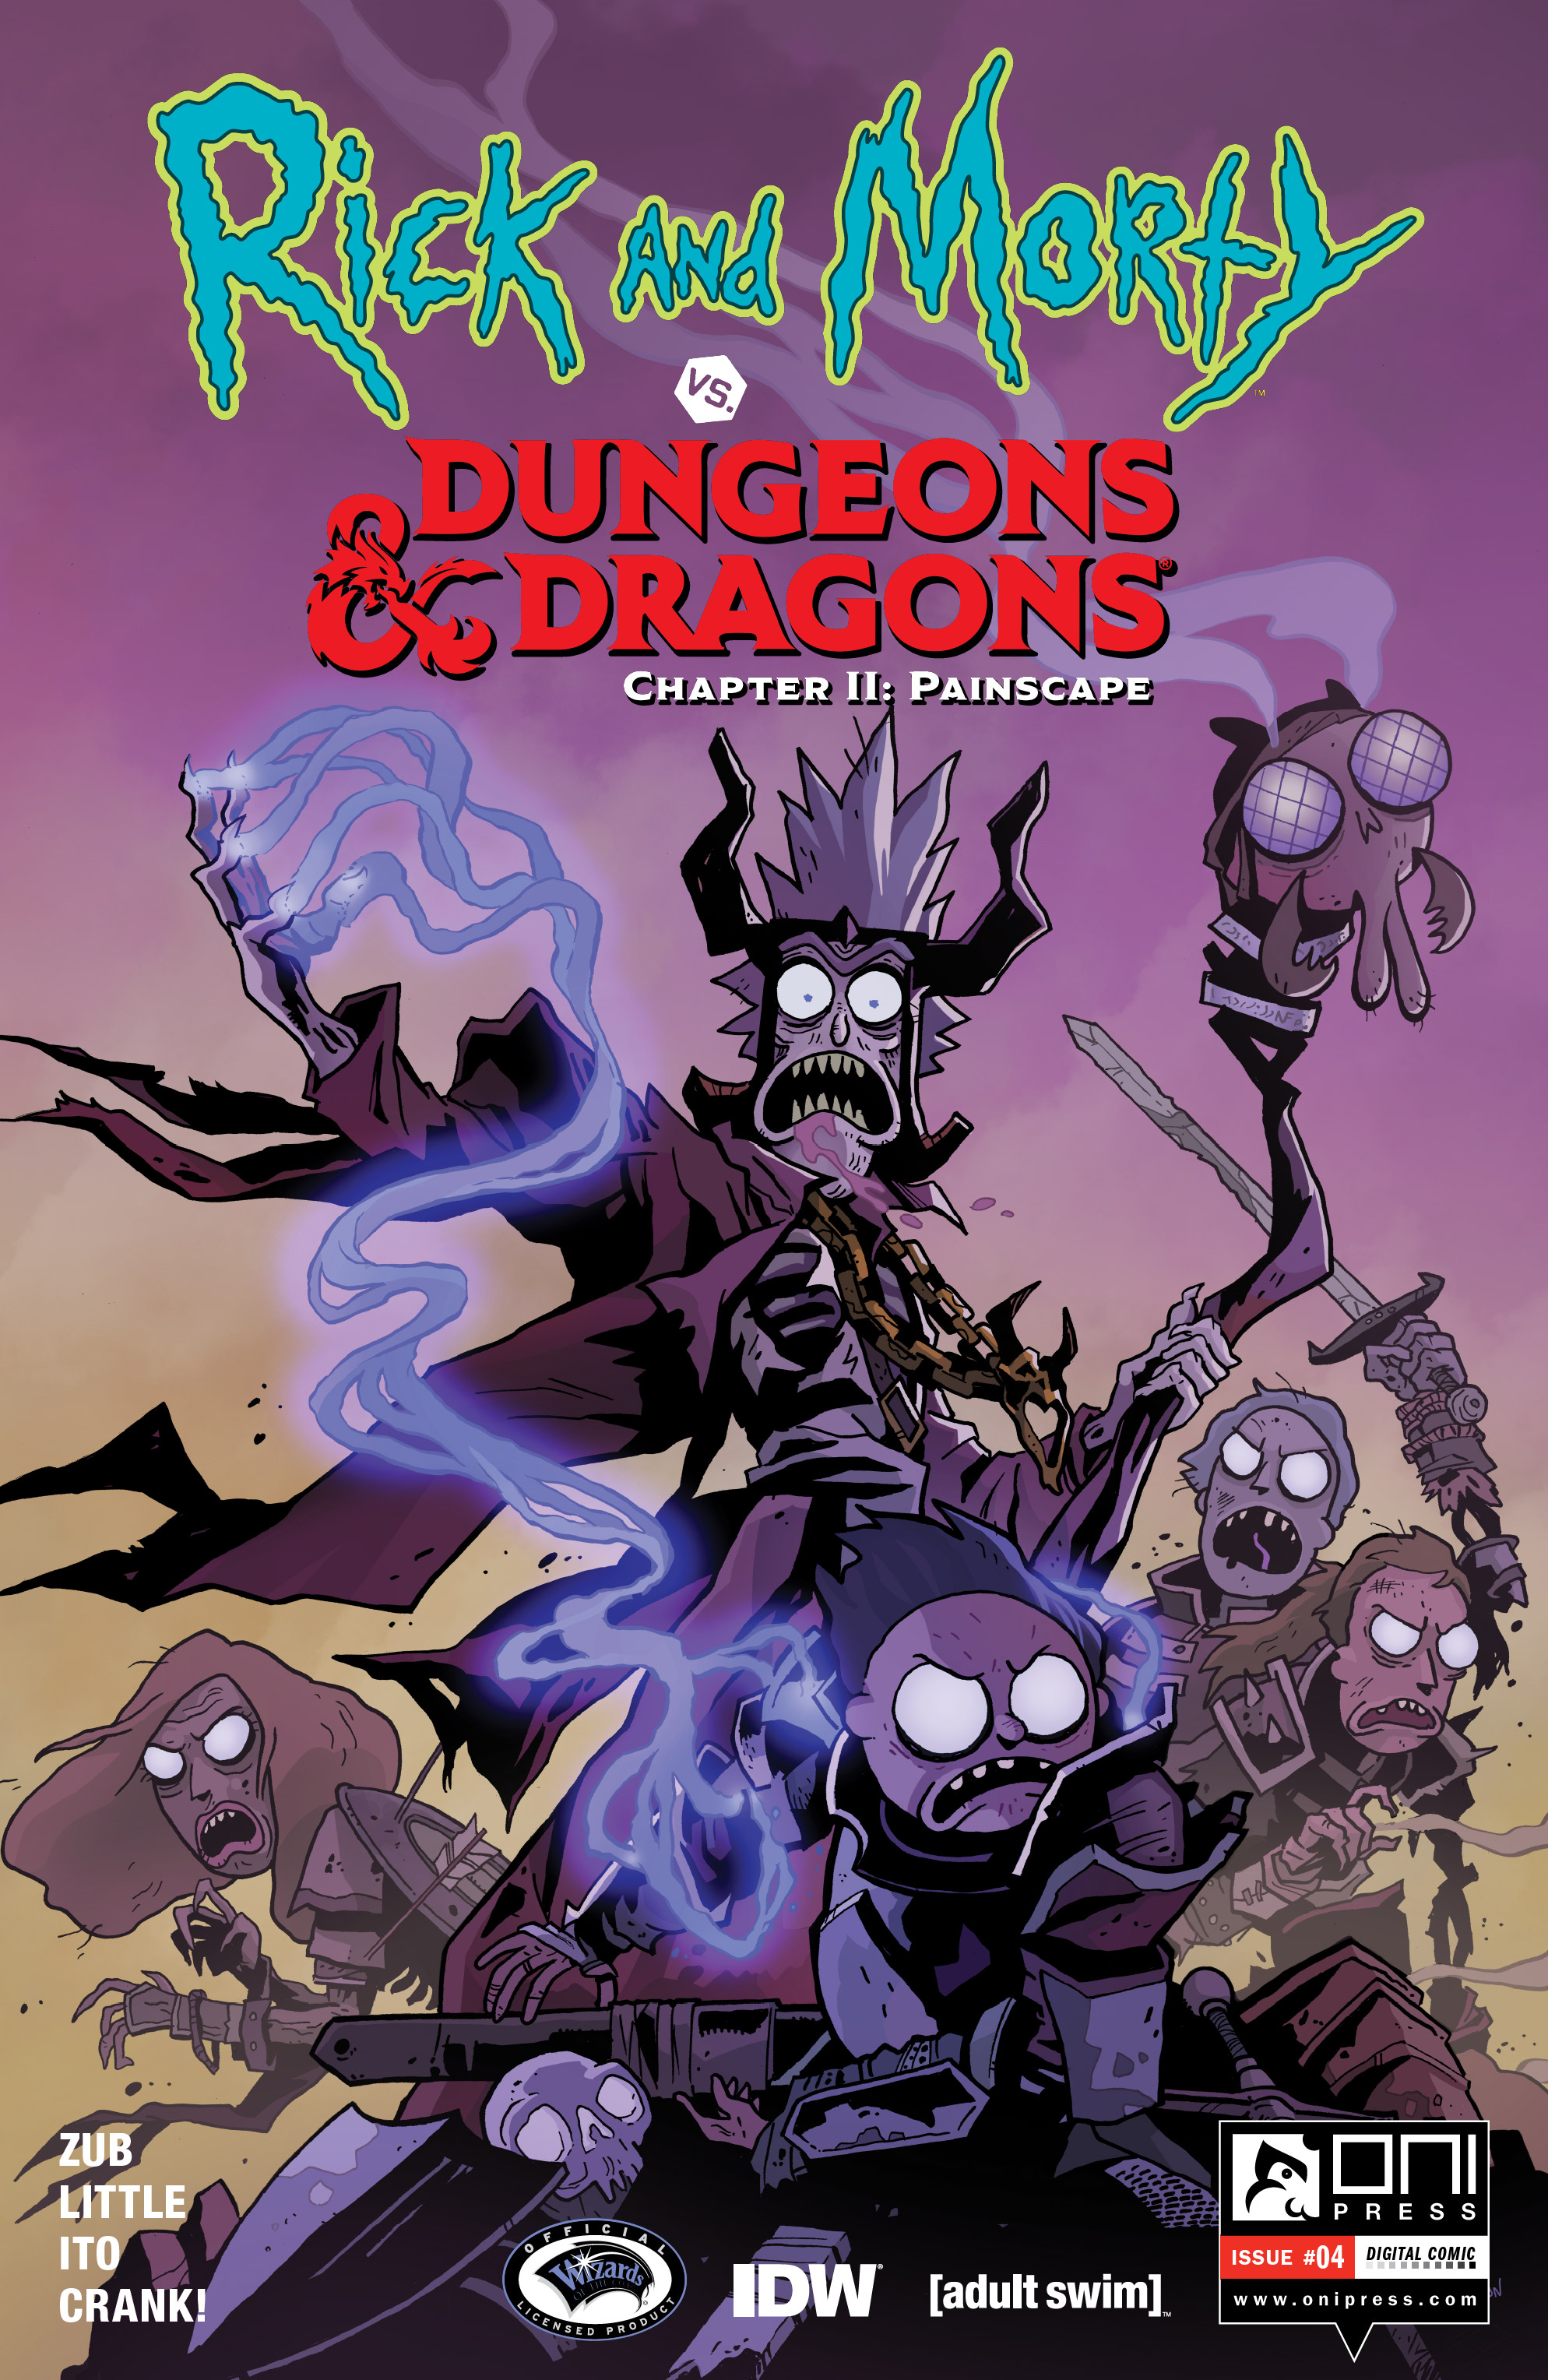 Read online Rick and Morty vs. Dungeons & Dragons II: Painscape comic -  Issue #4 - 1